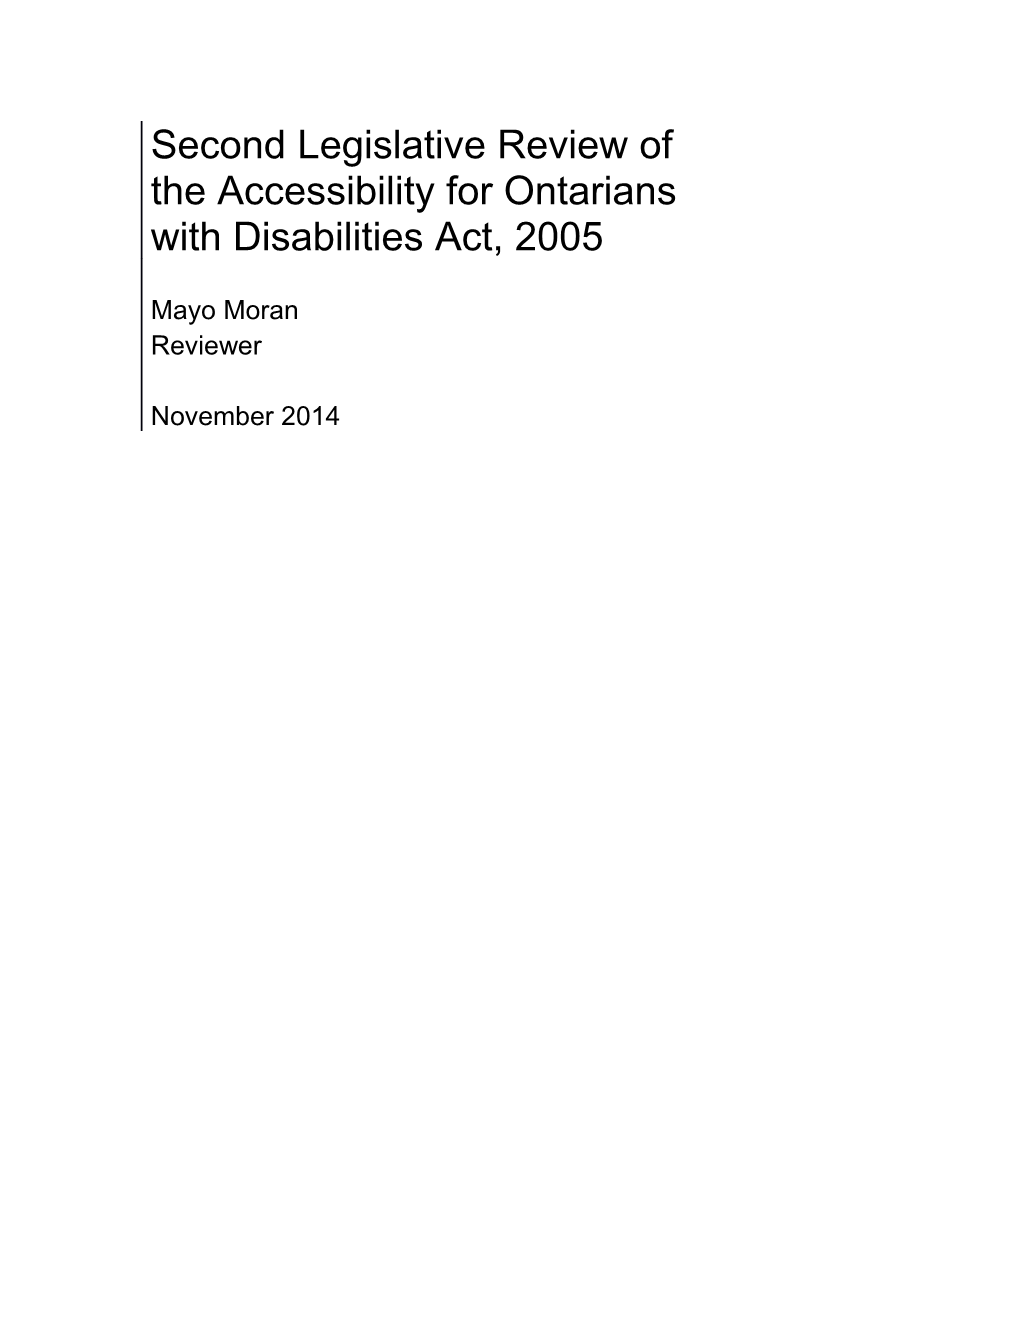 Second Legislative Review of the Accessibility for Ontarians with Disabilities Act, 2005